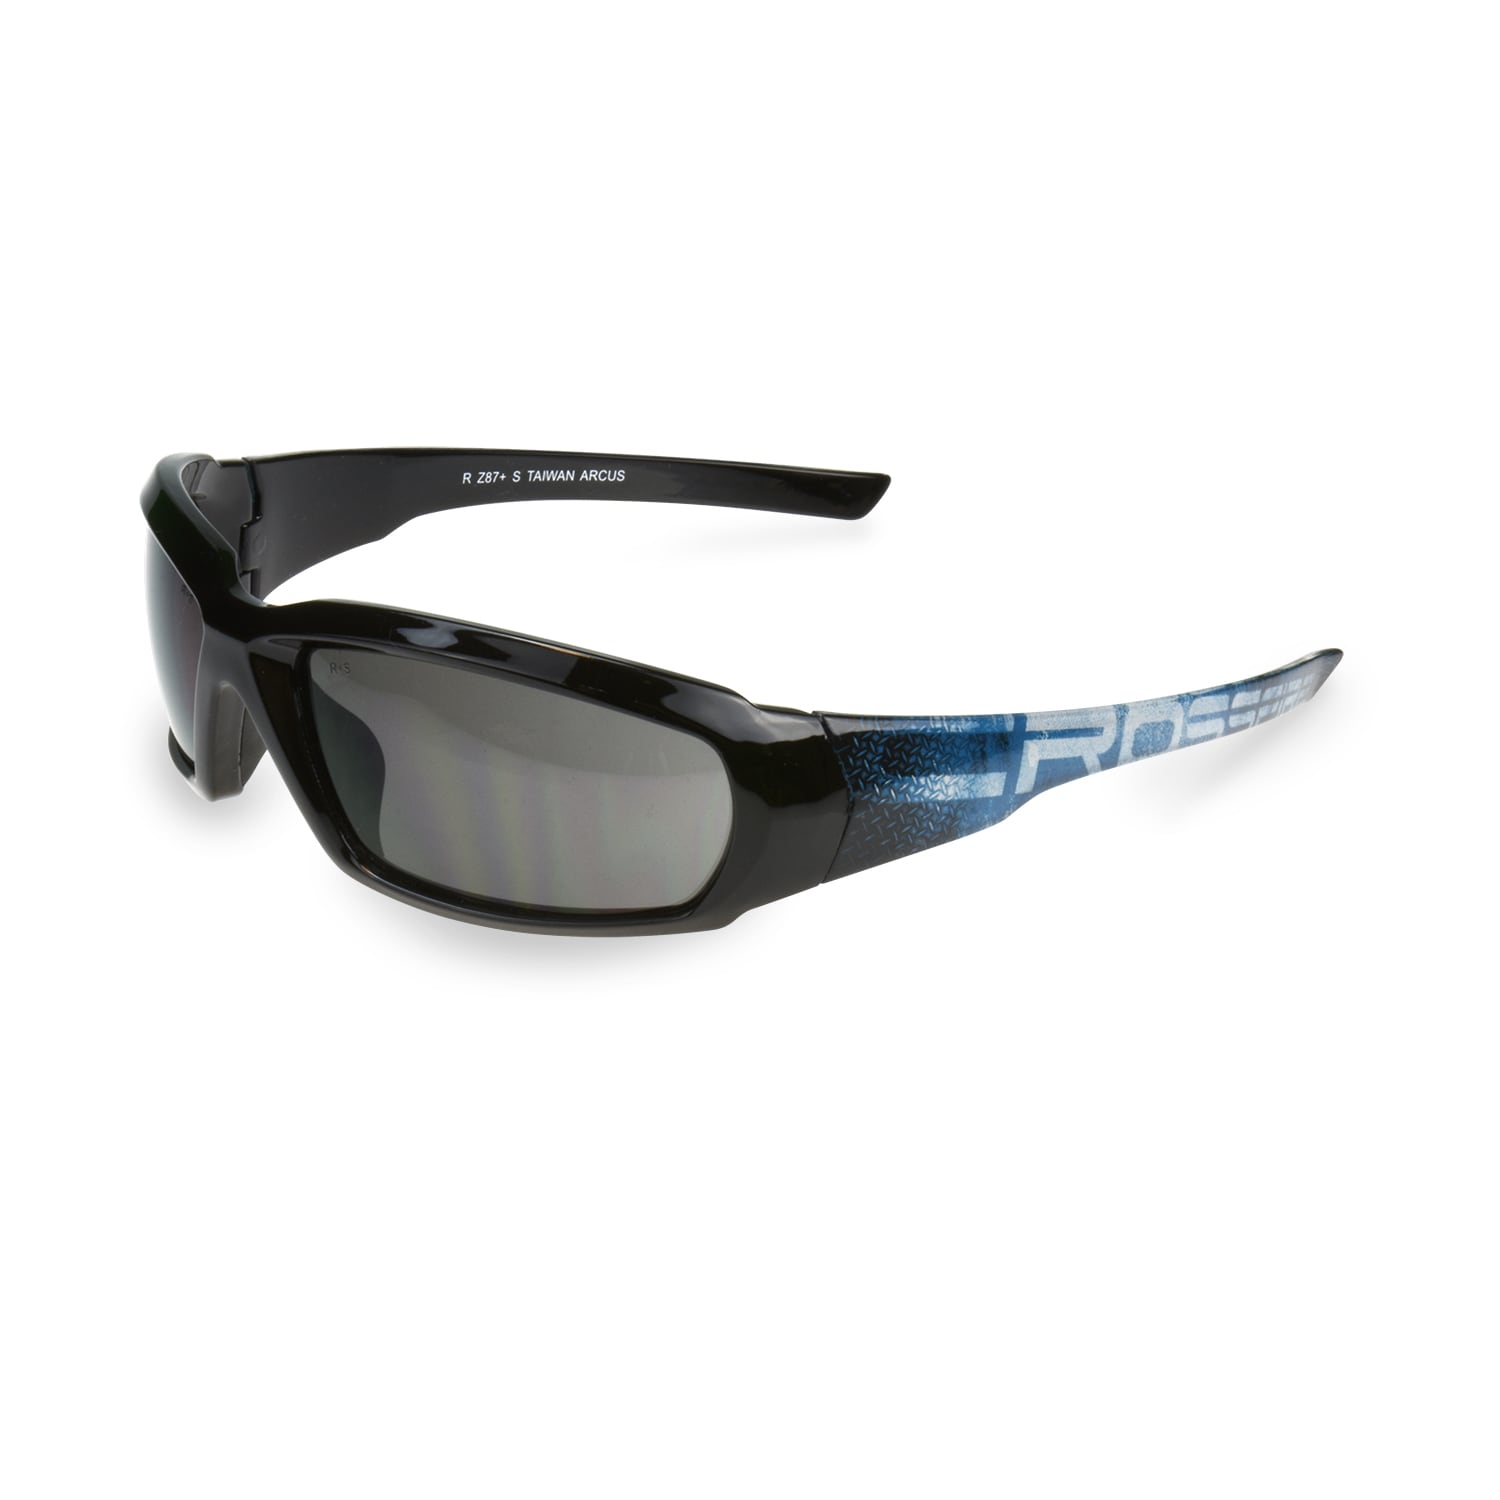 Crossfire Eyewear 20288 M6a Safety Glasses With Blue Frame and Mirror Lens  for sale online